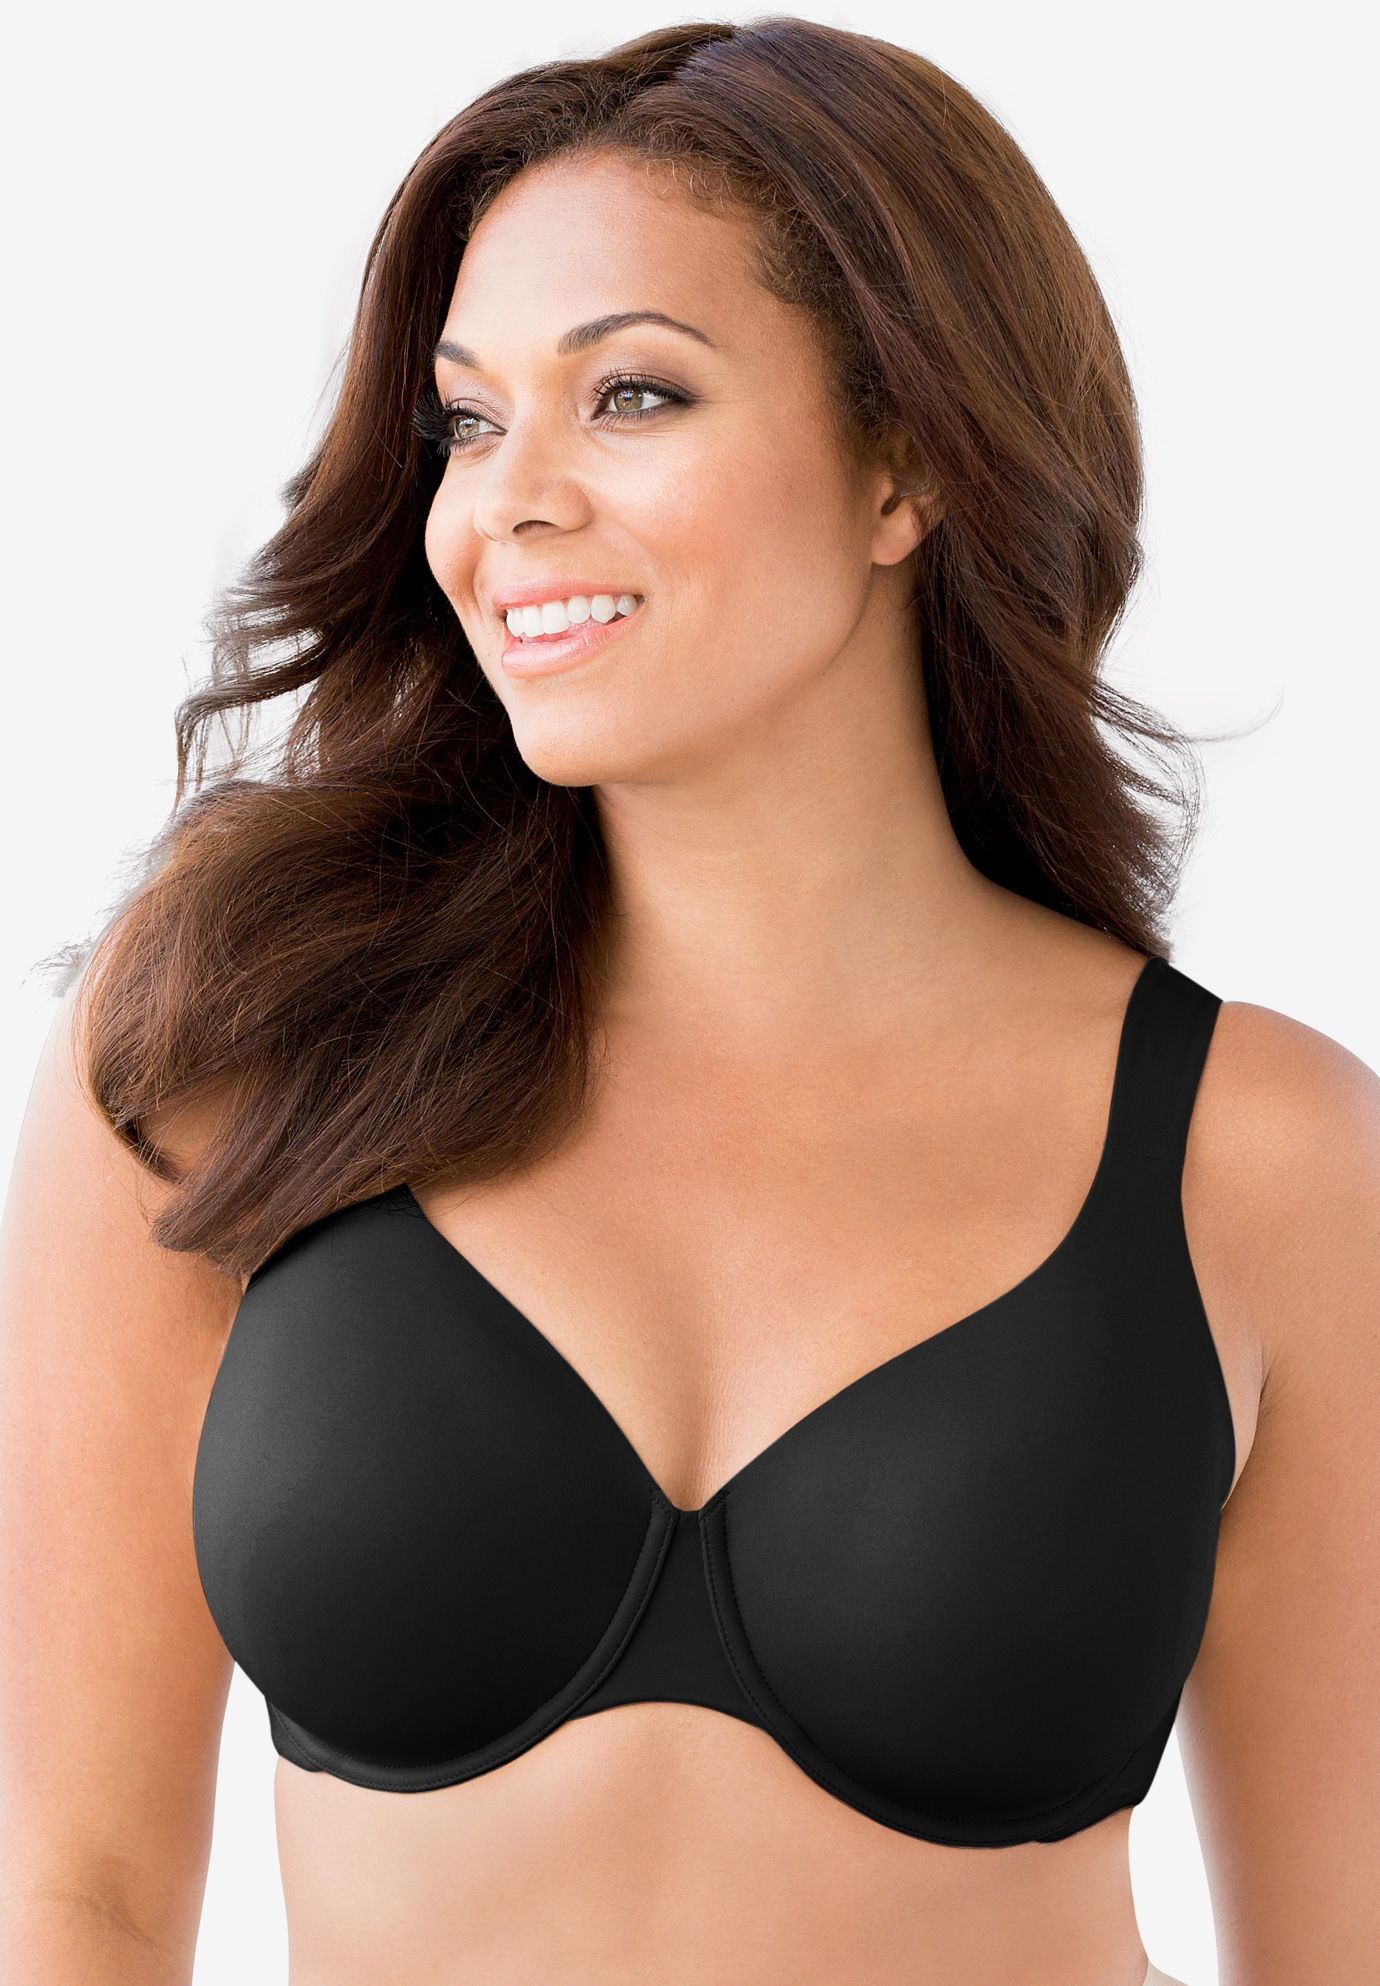 Cacique Lane Bryant Bra - Sheer with some lace - Black - 40C